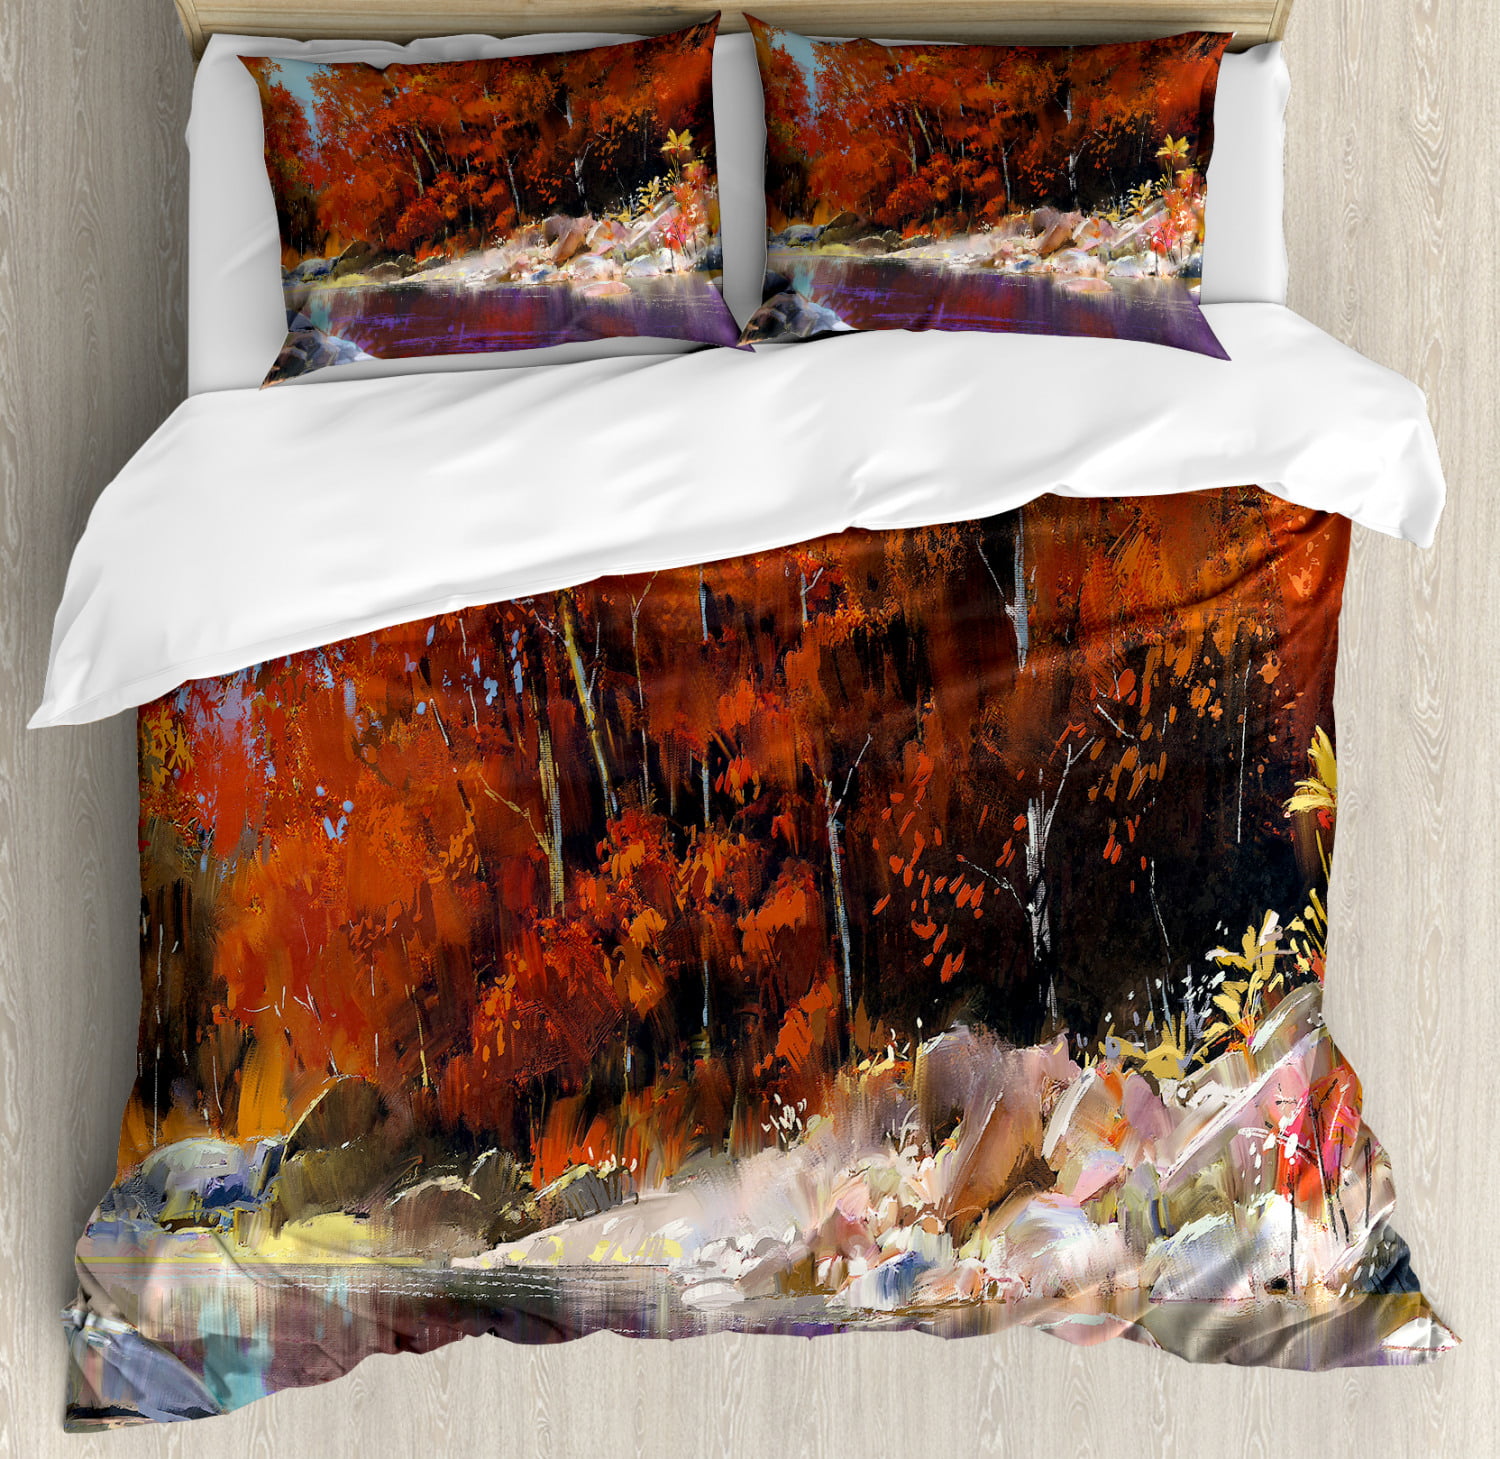 A Decorative 3 Piece Bedding Set with Pillow Shams Fall Forest with Shady Deciduous Trees and Faded Leaf Magic Woodland Theme Picture Queen/Full Ambesonne Autumn Duvet Cover Set Apricot Brown Red nev_27438_queen 